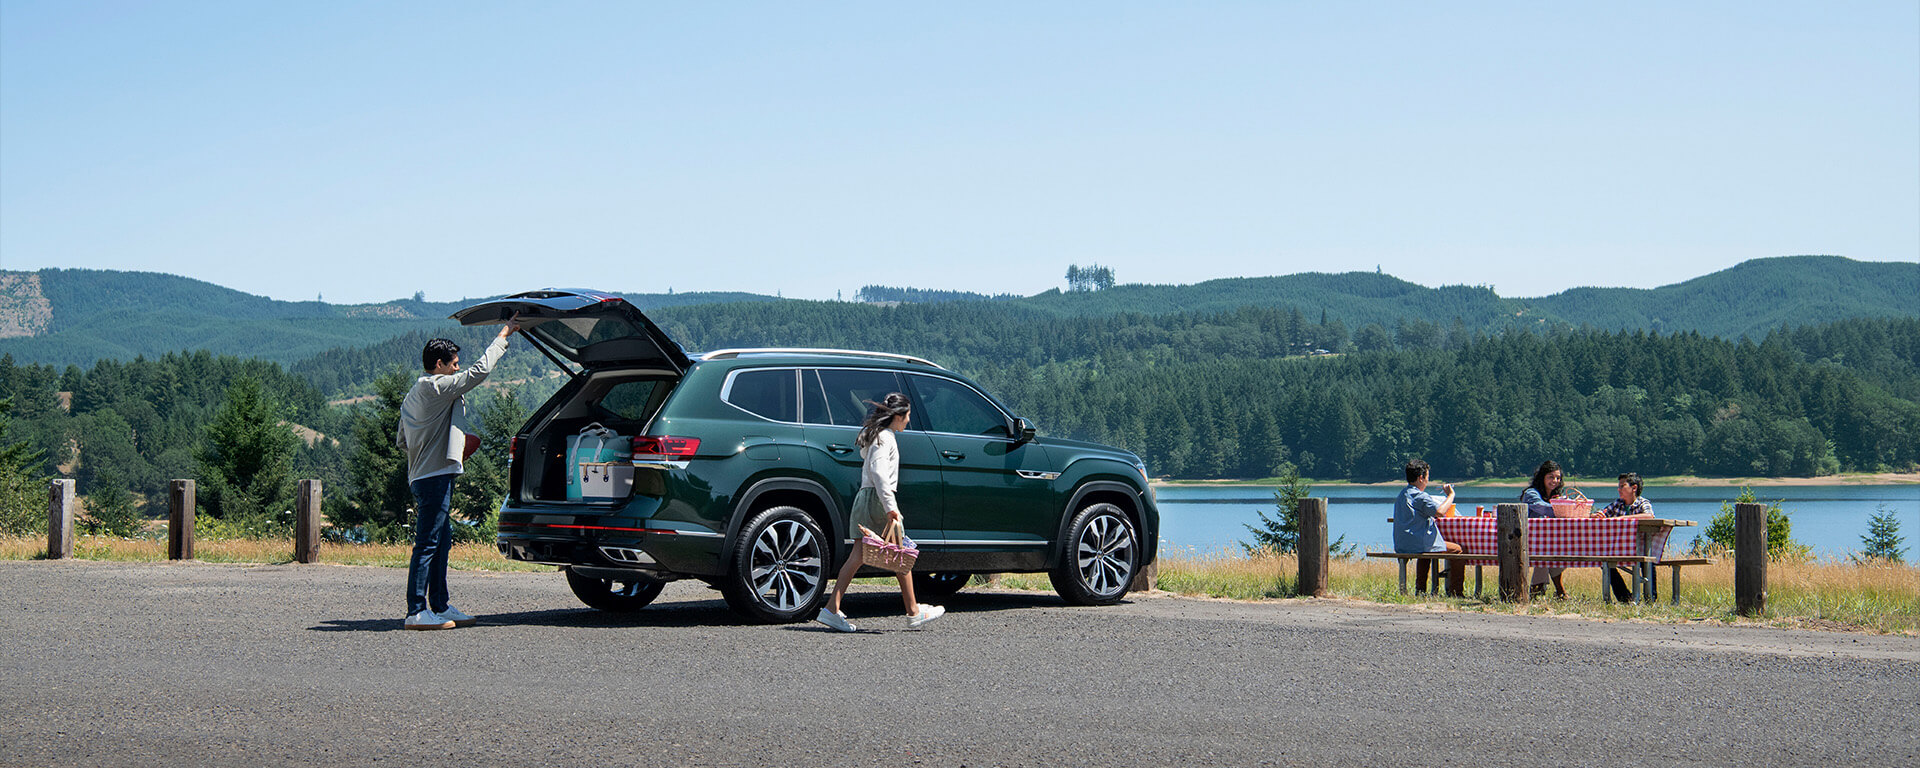 Person closing trunk of green 2023 Volkswagen atlas while family eats at picnic table near lake